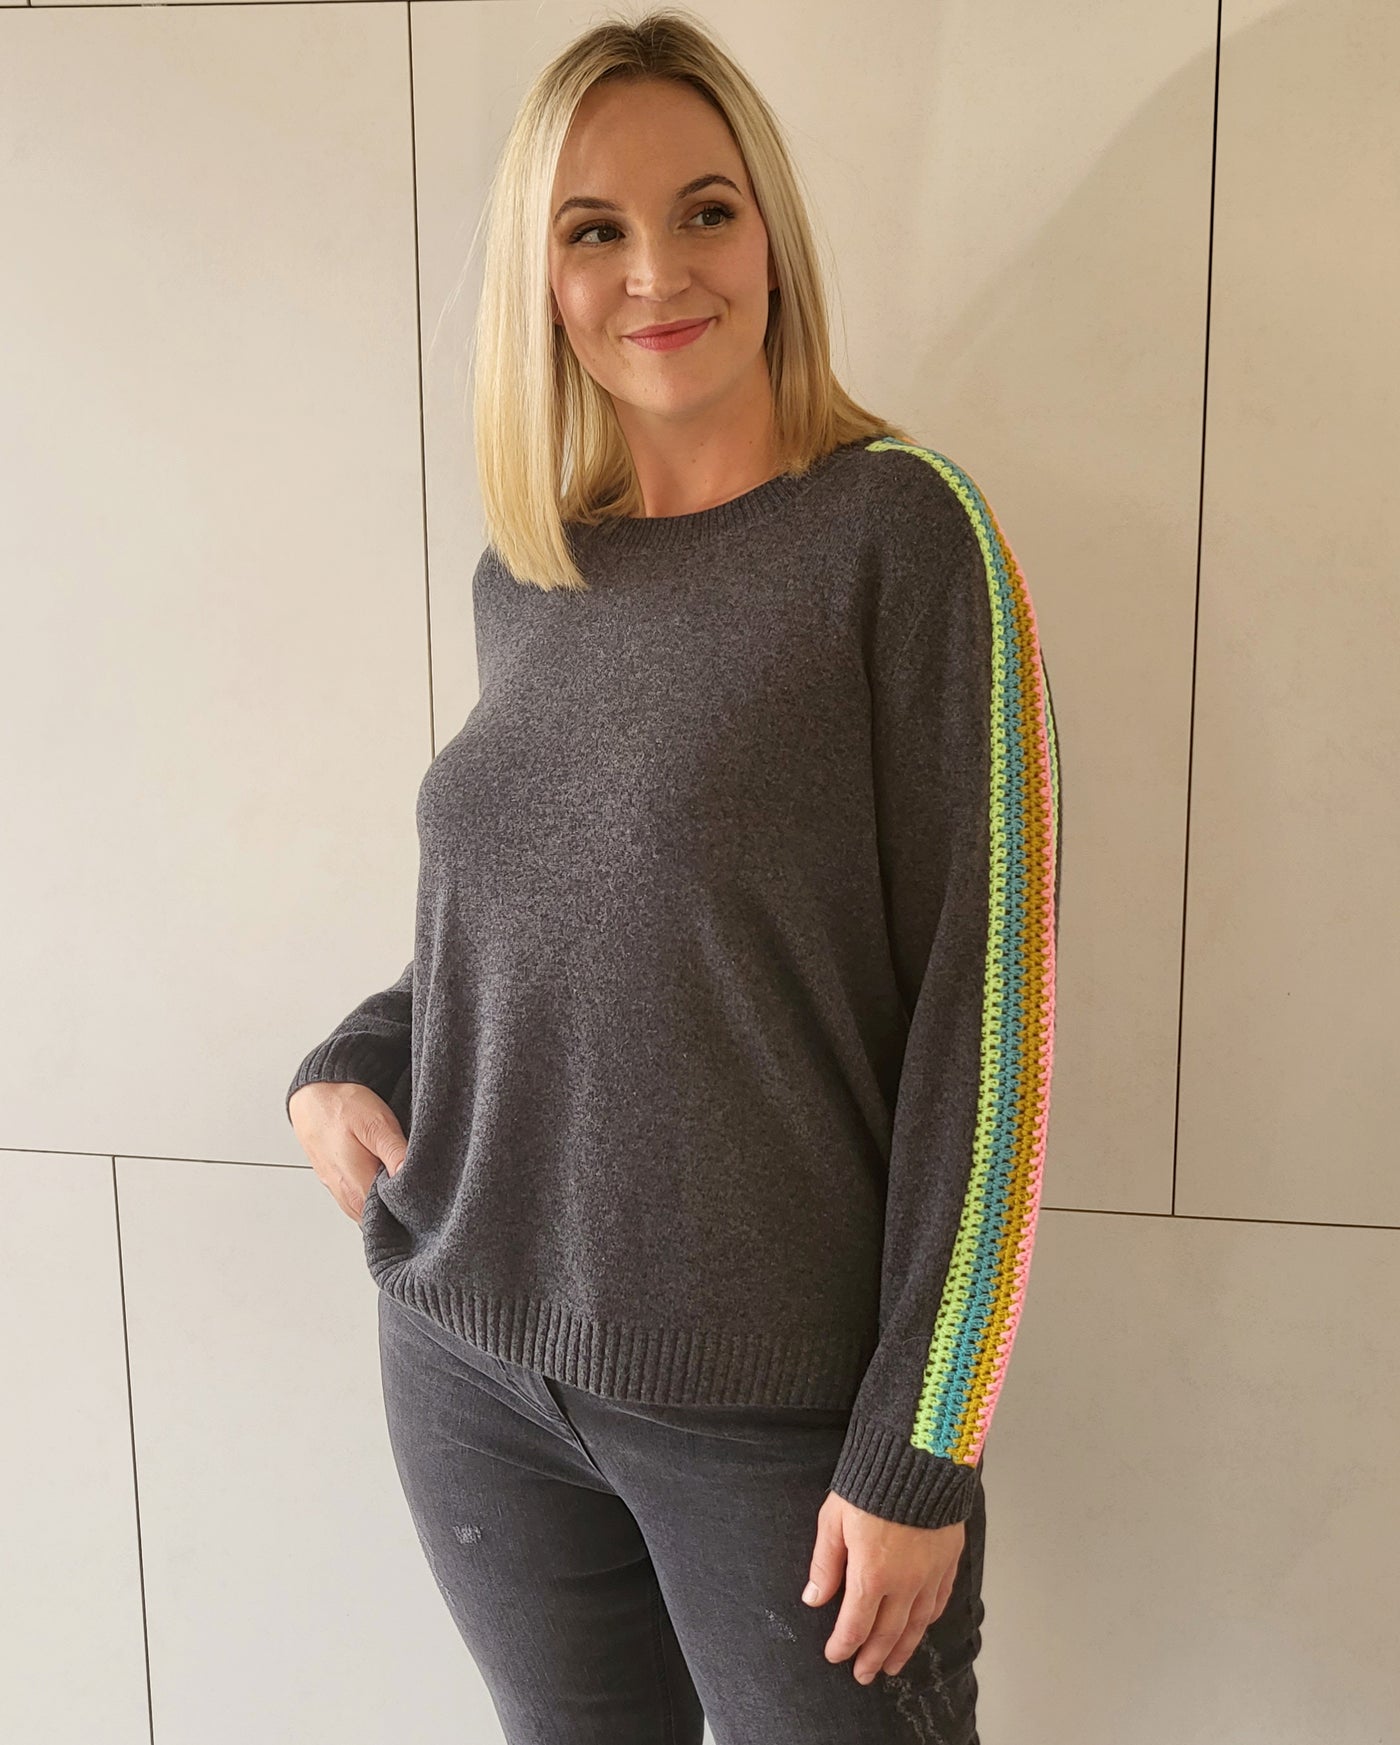 Lisa Todd Linked in Crochet Striped sleeve Cashmere Sweater in Flannel